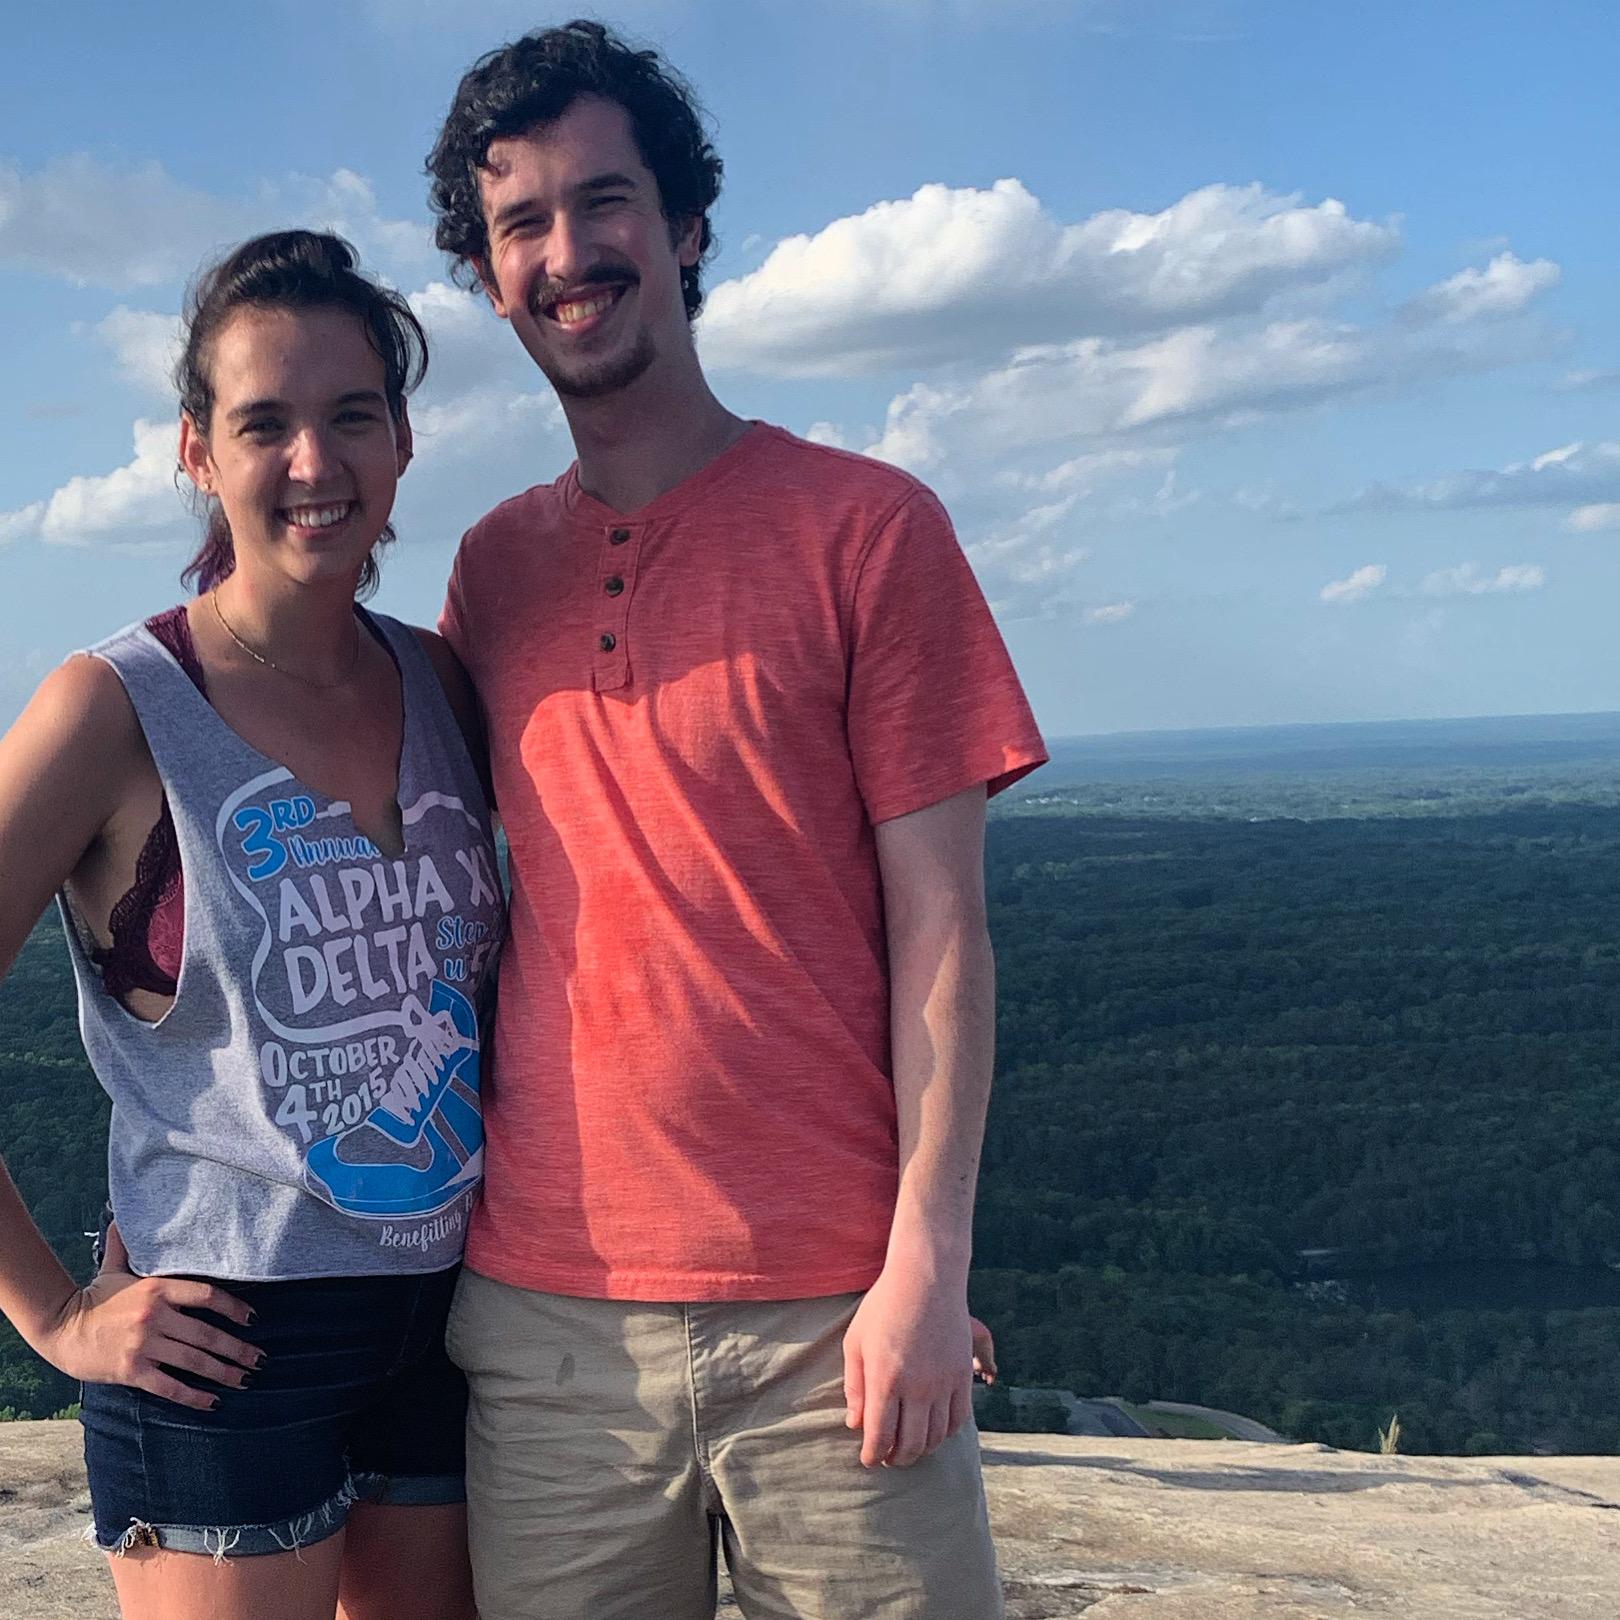 We started dating January 2020, so we had about 6 months of outdoor dates. This day, Groomsman Marshal walked 12 miles (idk covid) to Stone Mountain and we met him at the finish line with beers!